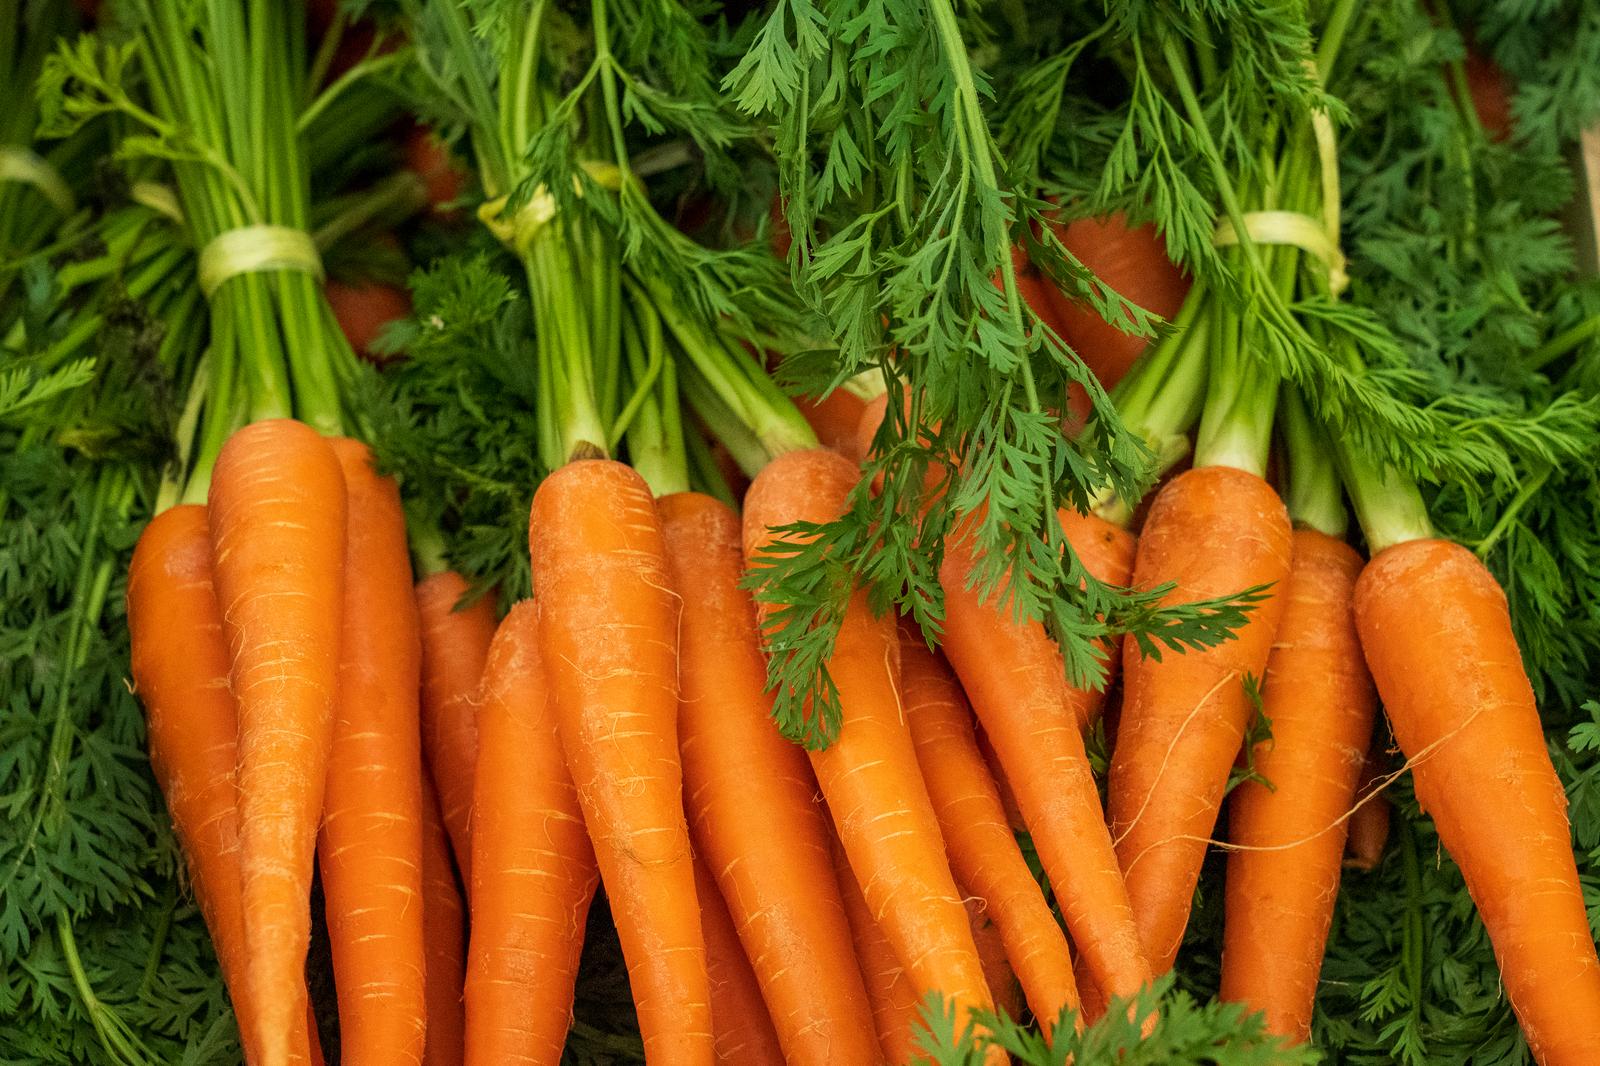 I’ll Reveal What 🐙 Misunderstood Animal Your Soul Aligns With Simply Based on This “Would You Rather” Food Test Carrots